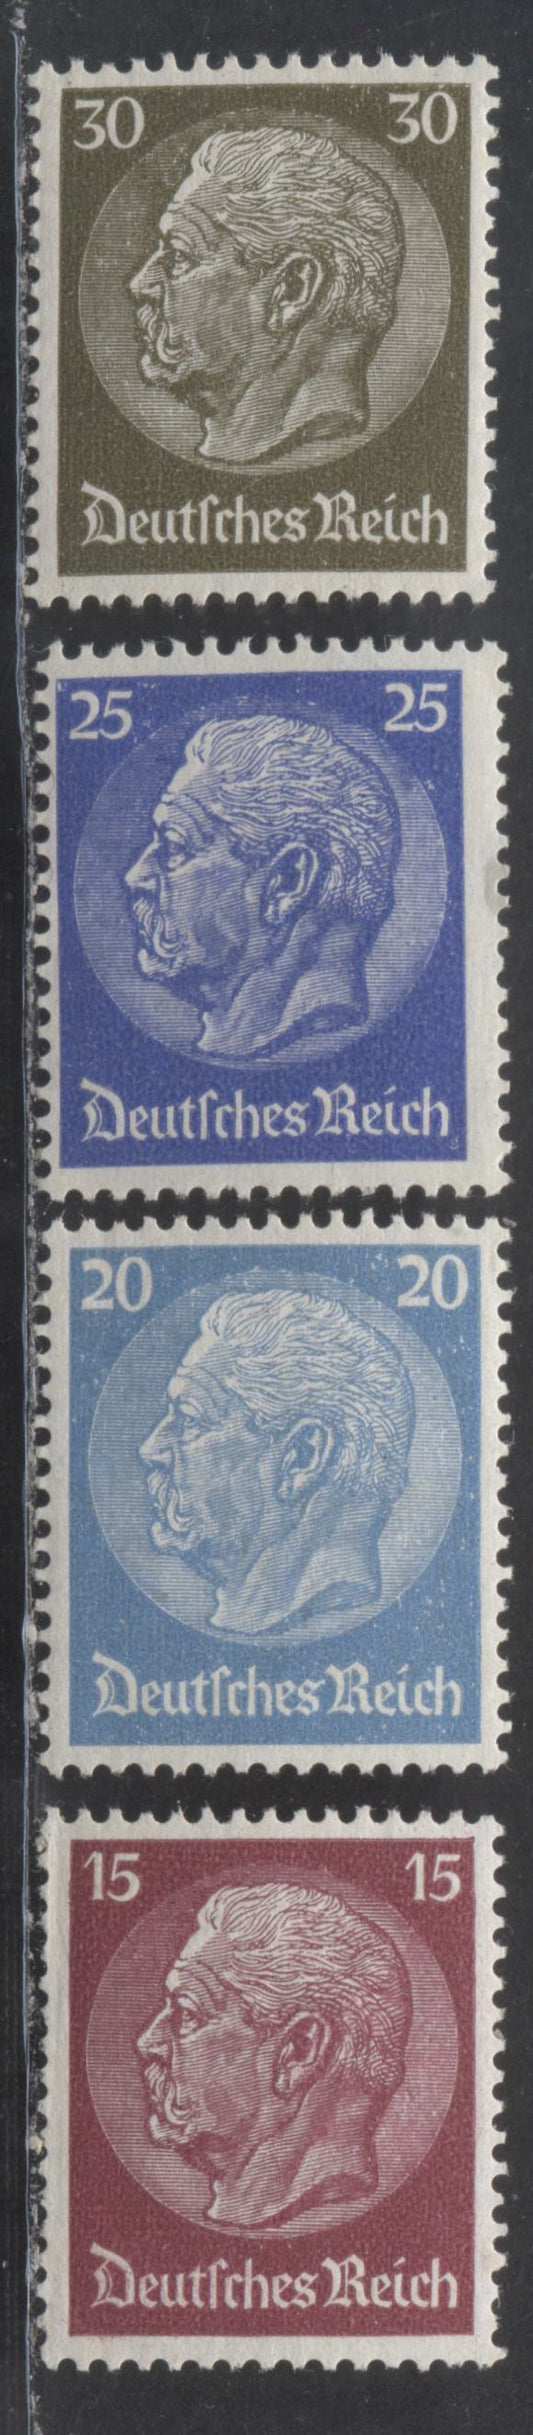 Lot 69 Germany SC#423-426 1933-1936 Hindenburg Issue, Swastika Wmk, 4 F/VFNH Singles, Click on Listing to See ALL Pictures, 2022 Scott Classic Cat. $15.25 USD